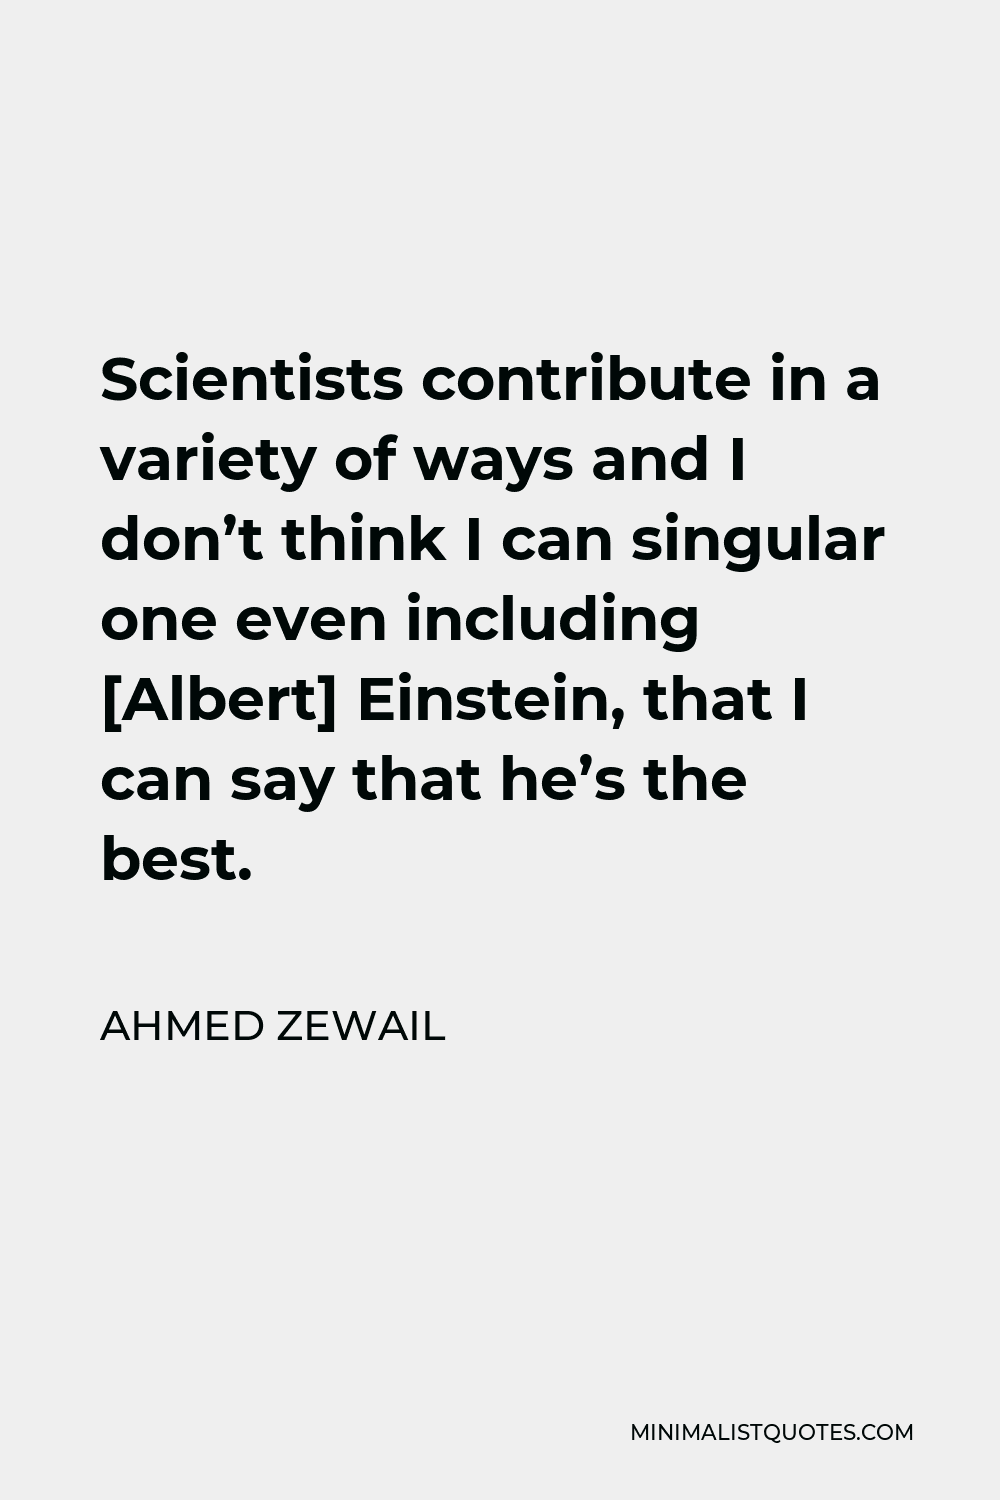 Ahmed Zewail Quote - Scientists contribute in a variety of ways and I don’t think I can singular one even including [Albert] Einstein, that I can say that he’s the best.